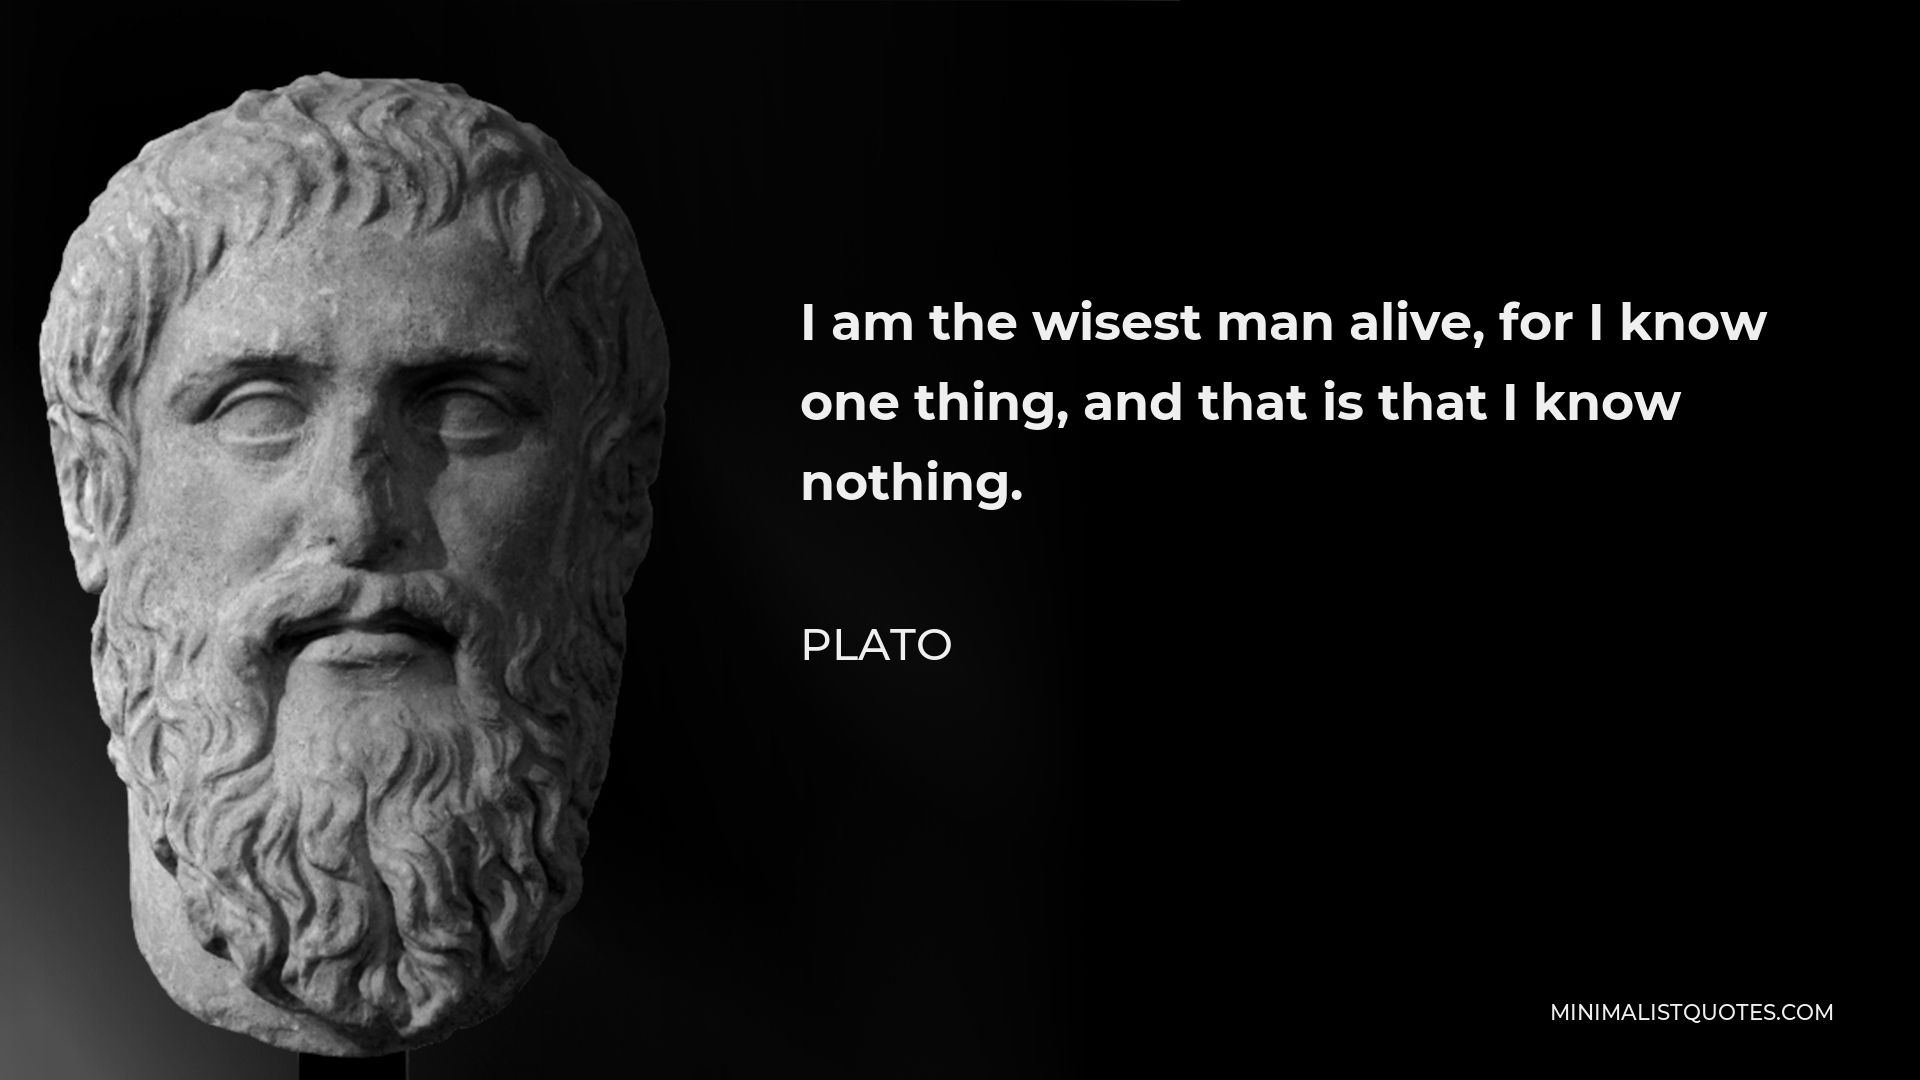 Plato Quote - I am the wisest man alive, for I know one thing, and that is that I know nothing.